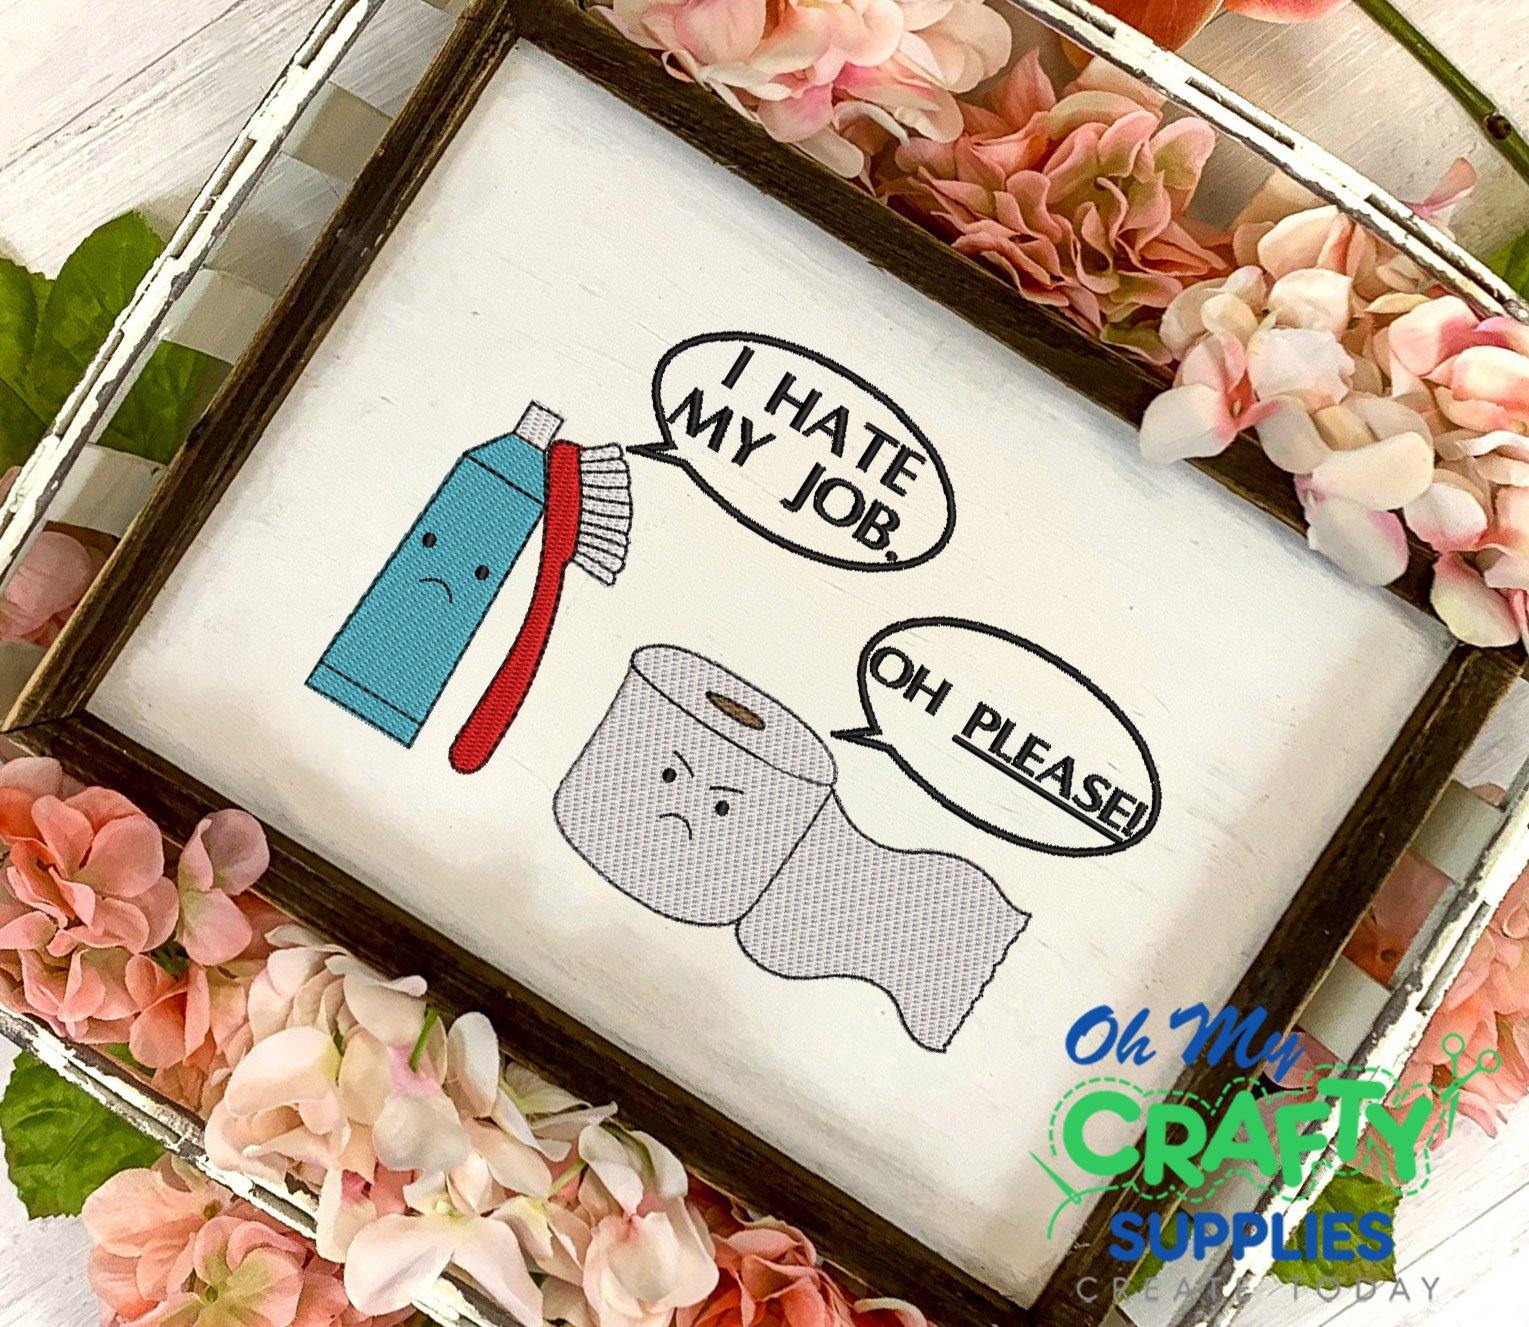 I Hate my Job Tooth Brush and Oh Please Tissue Embroidery Design - Oh My Crafty Supplies Inc.